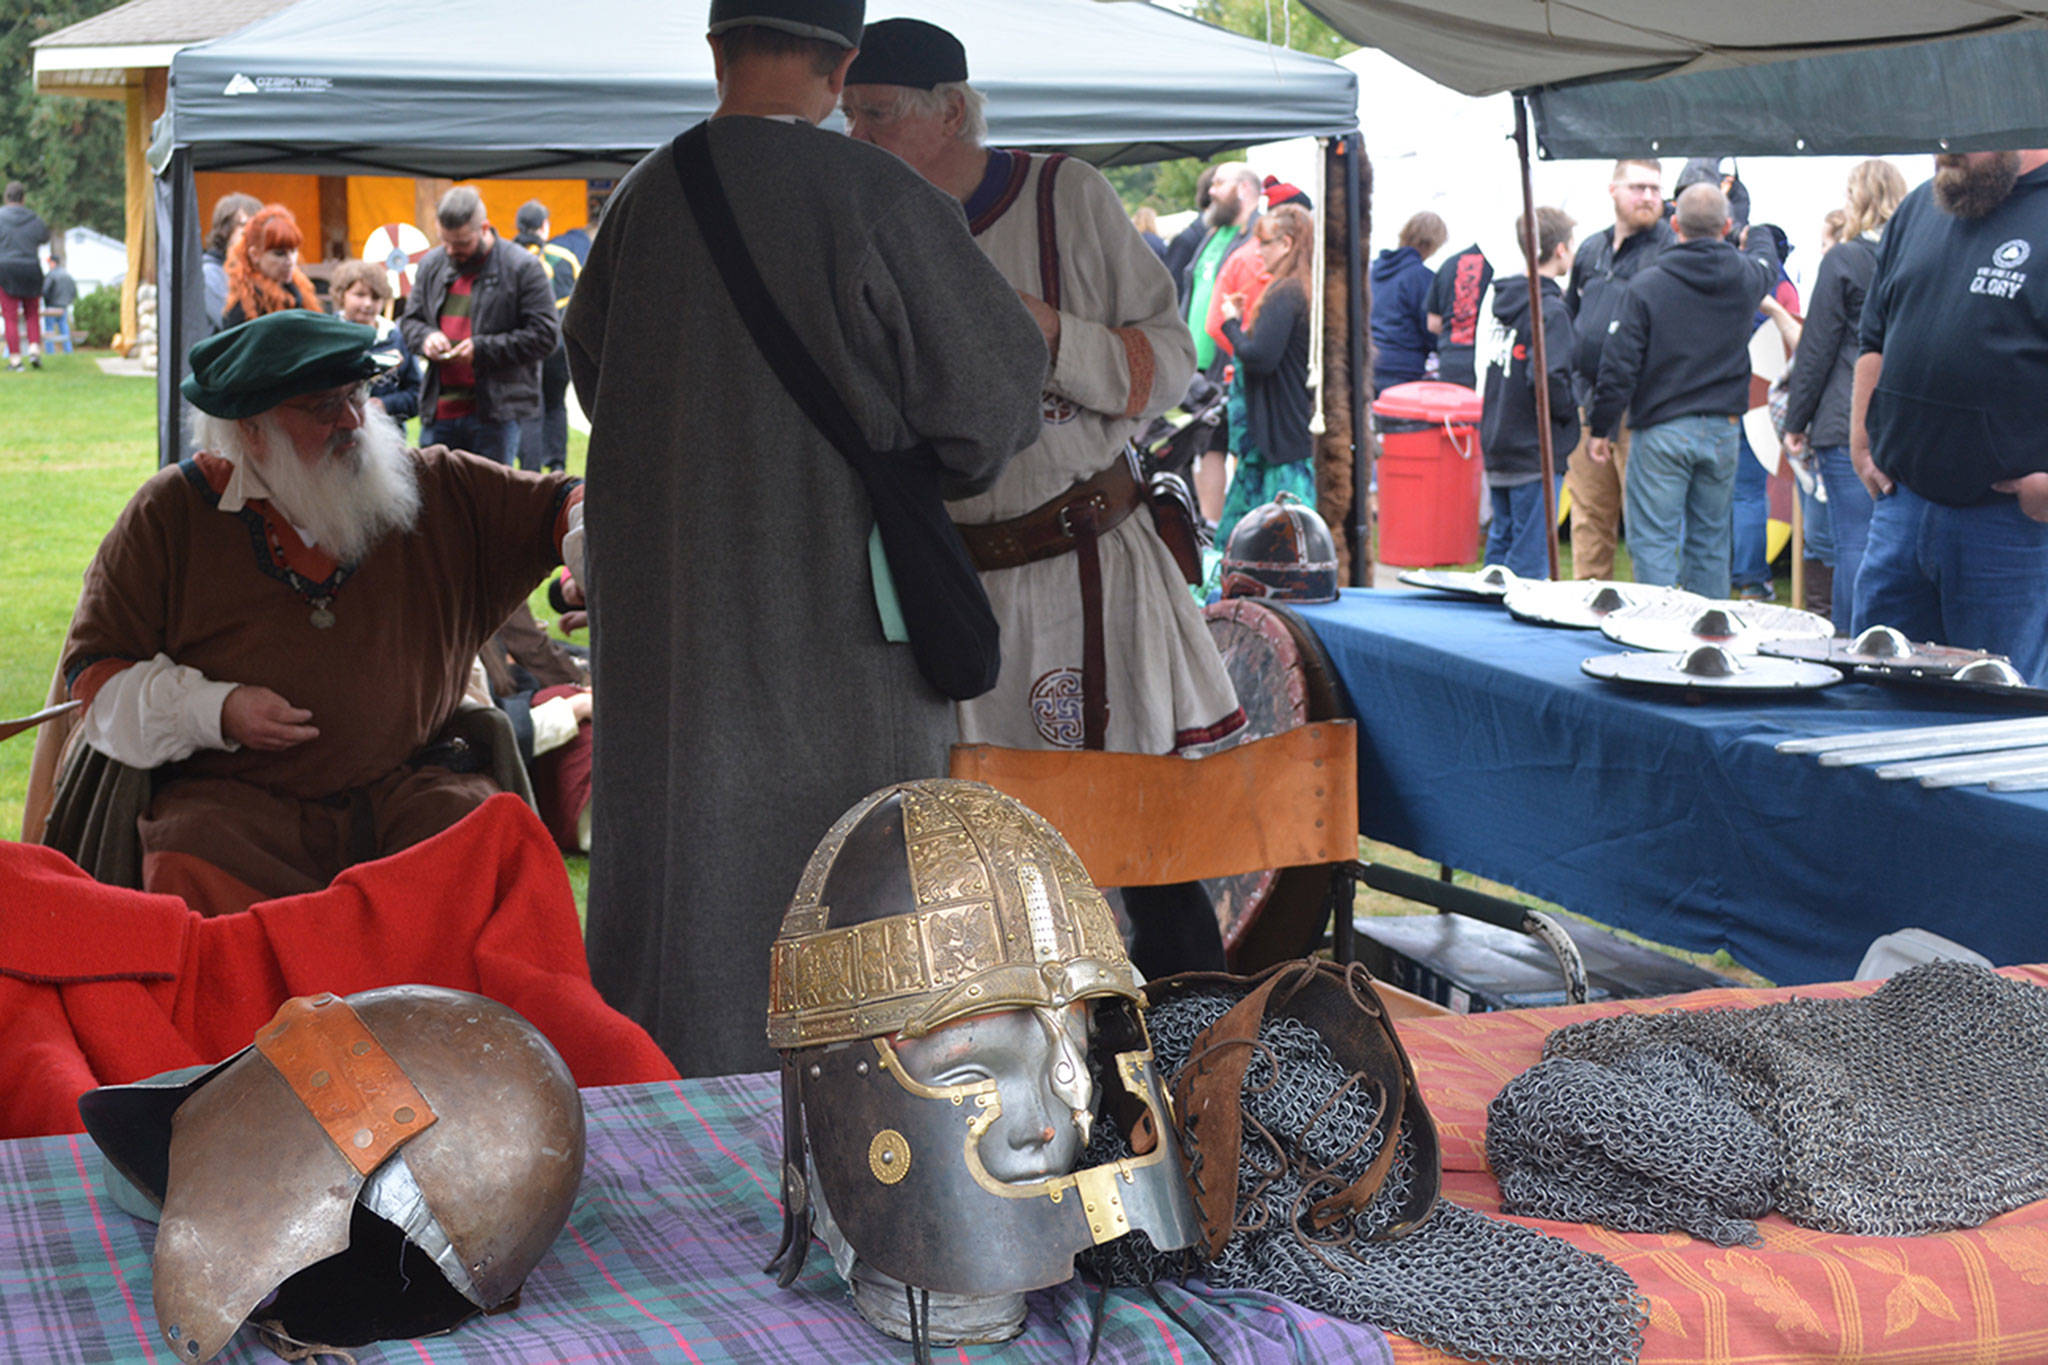 All aim to have a good time at 3rd Arlington Viking Fest